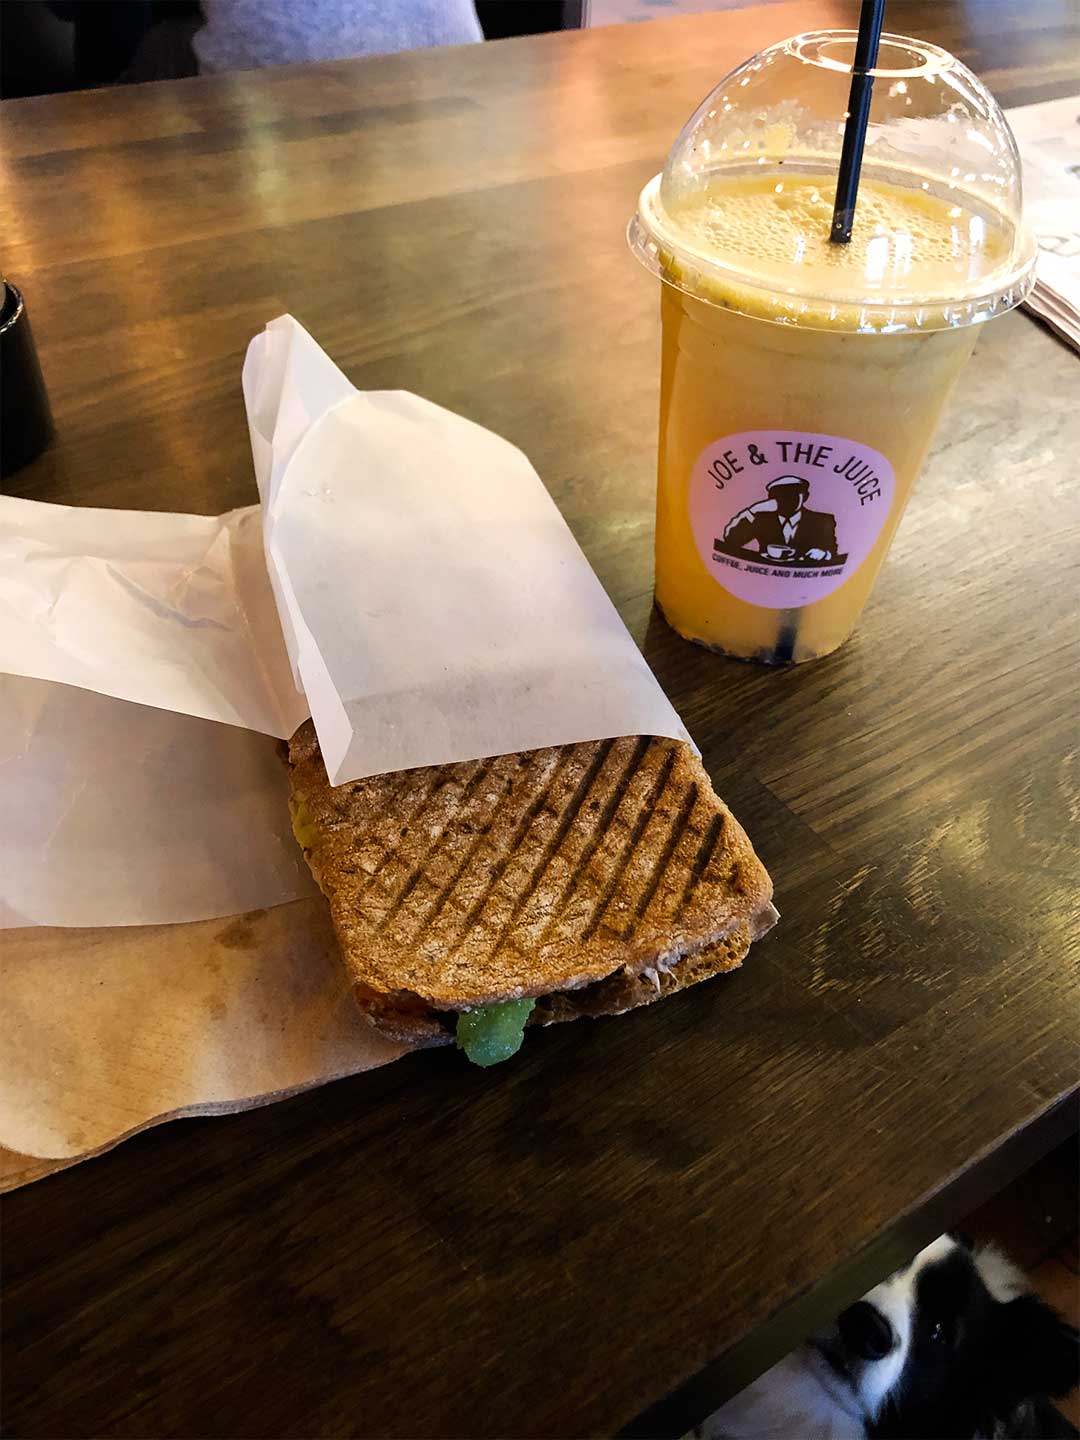 Sandwich and a fresh juice snack at Joe and The Juice at the Stockmann shopping center in Helsinki, Finland.